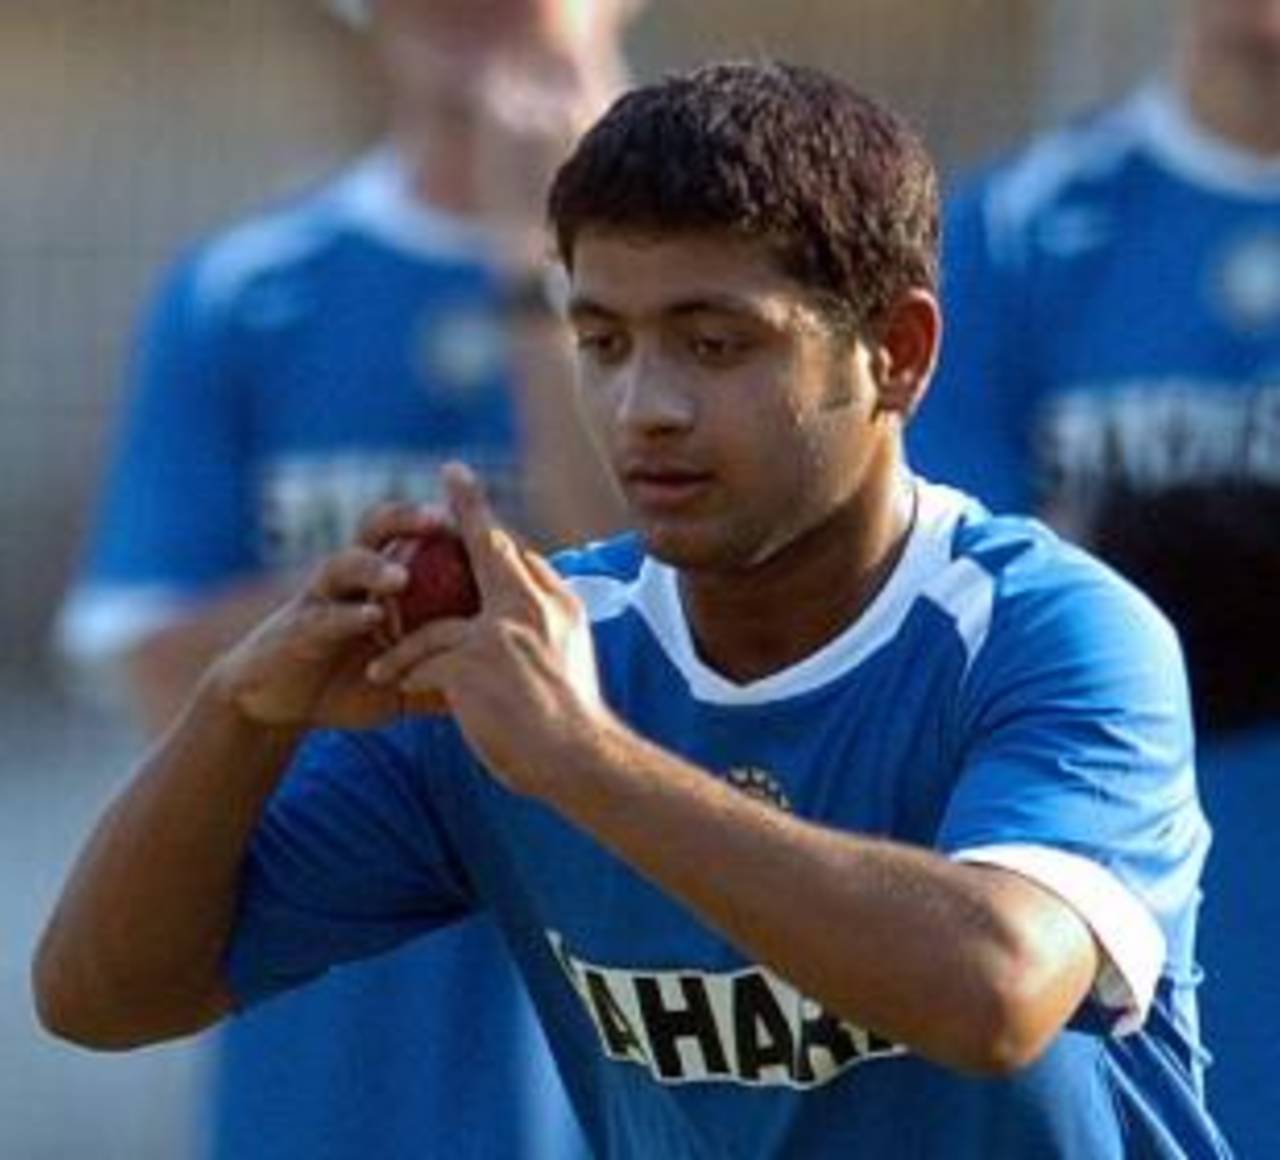 Piyush Chawla prepares to bowl during a practice session at Nagpur, February 26, 2005